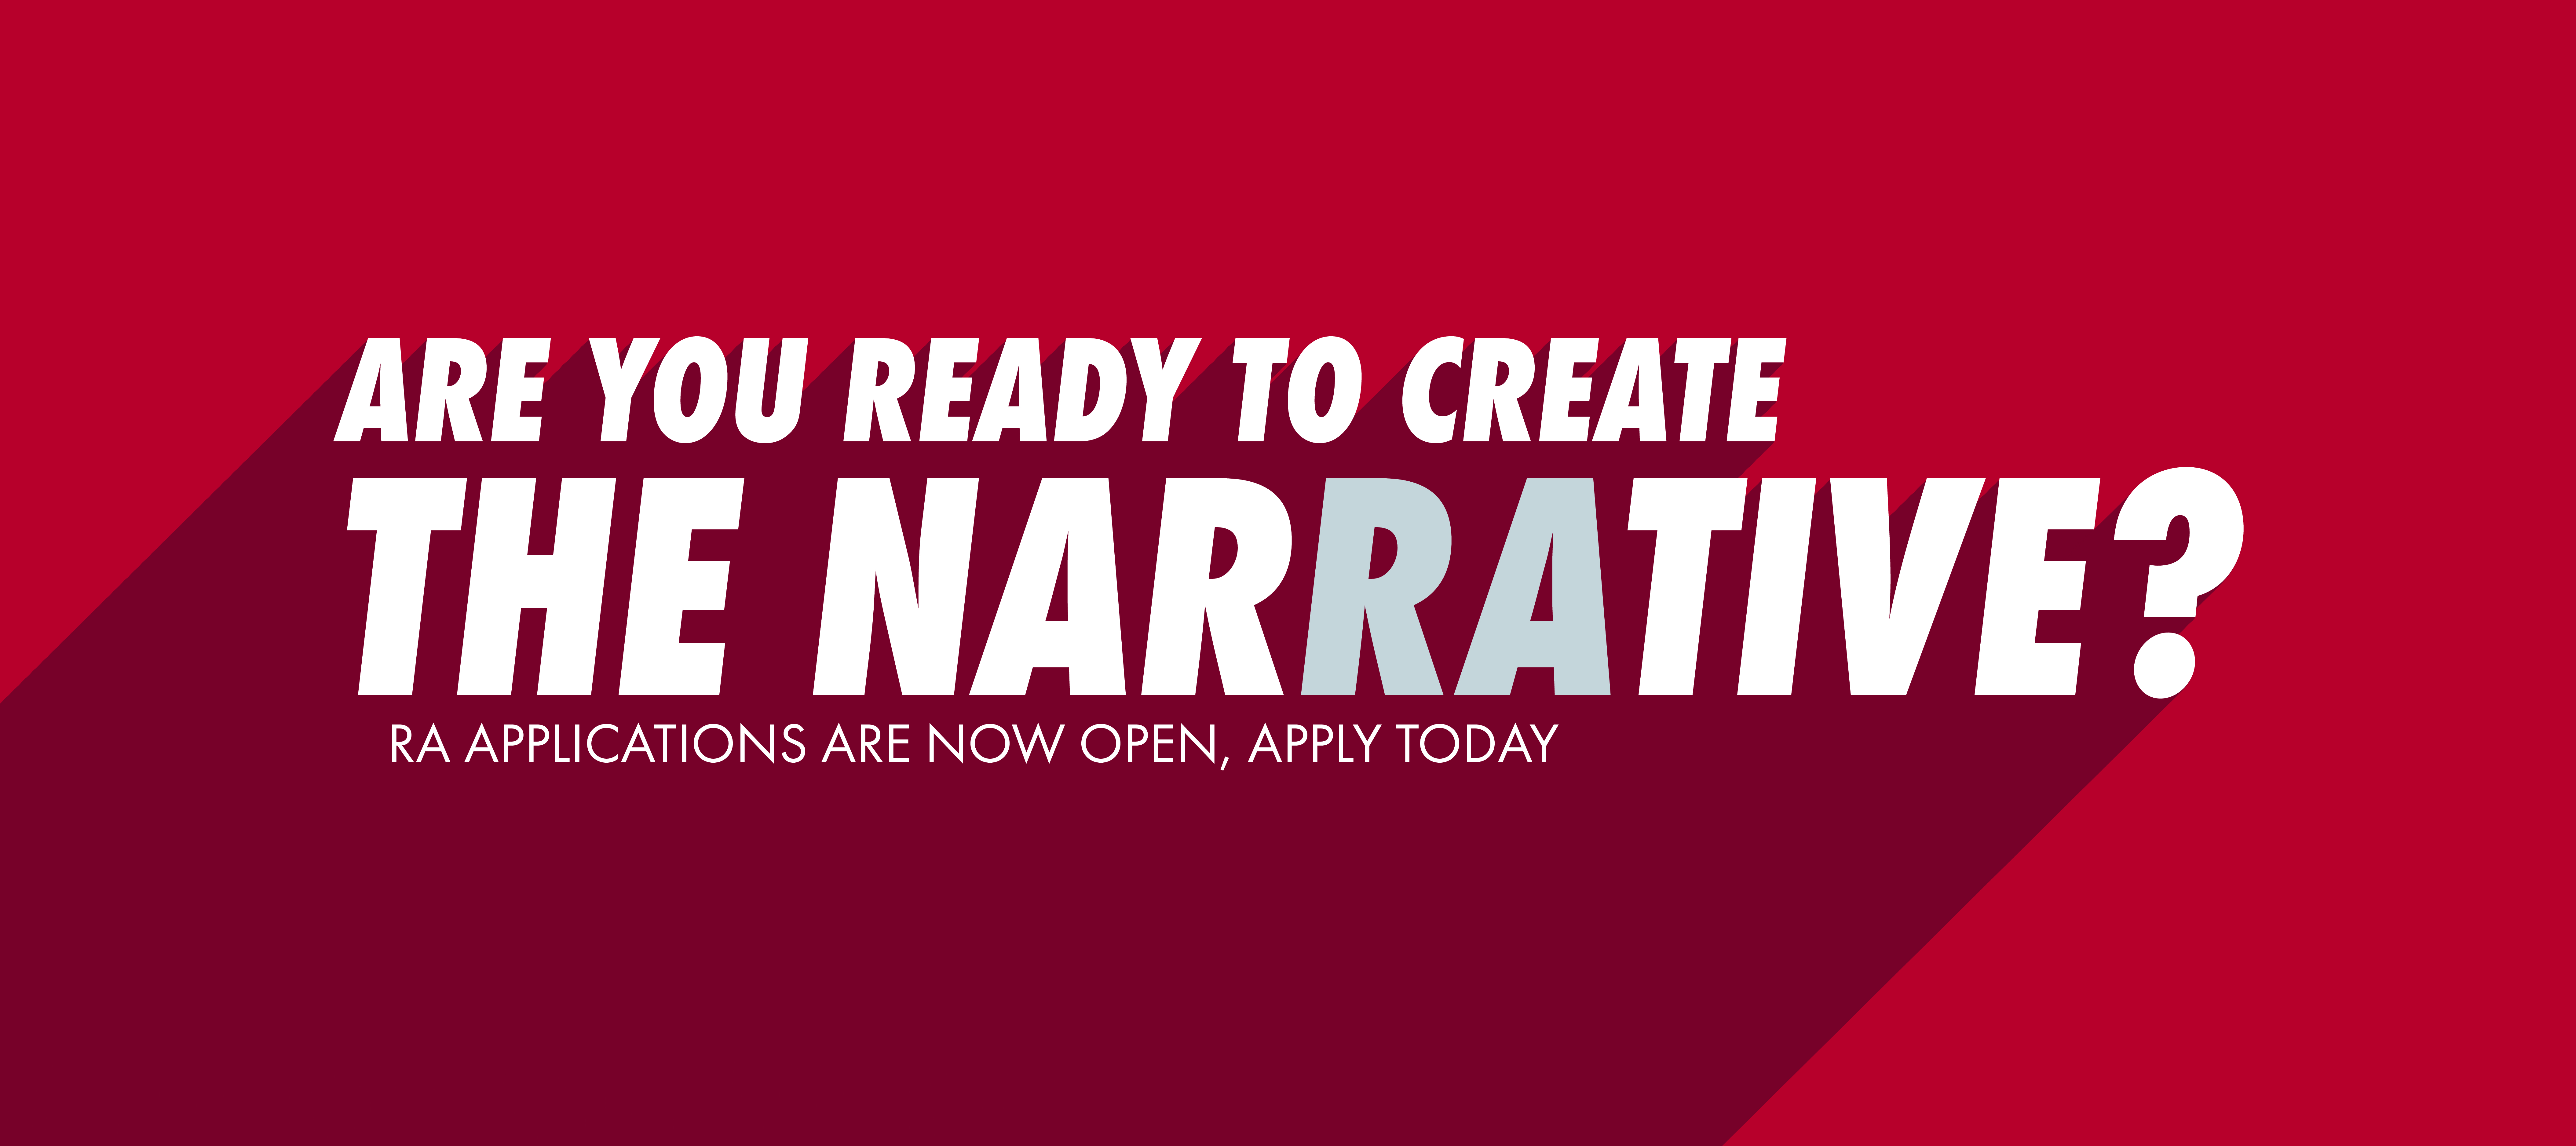 Are you ready to create the narRAtive?